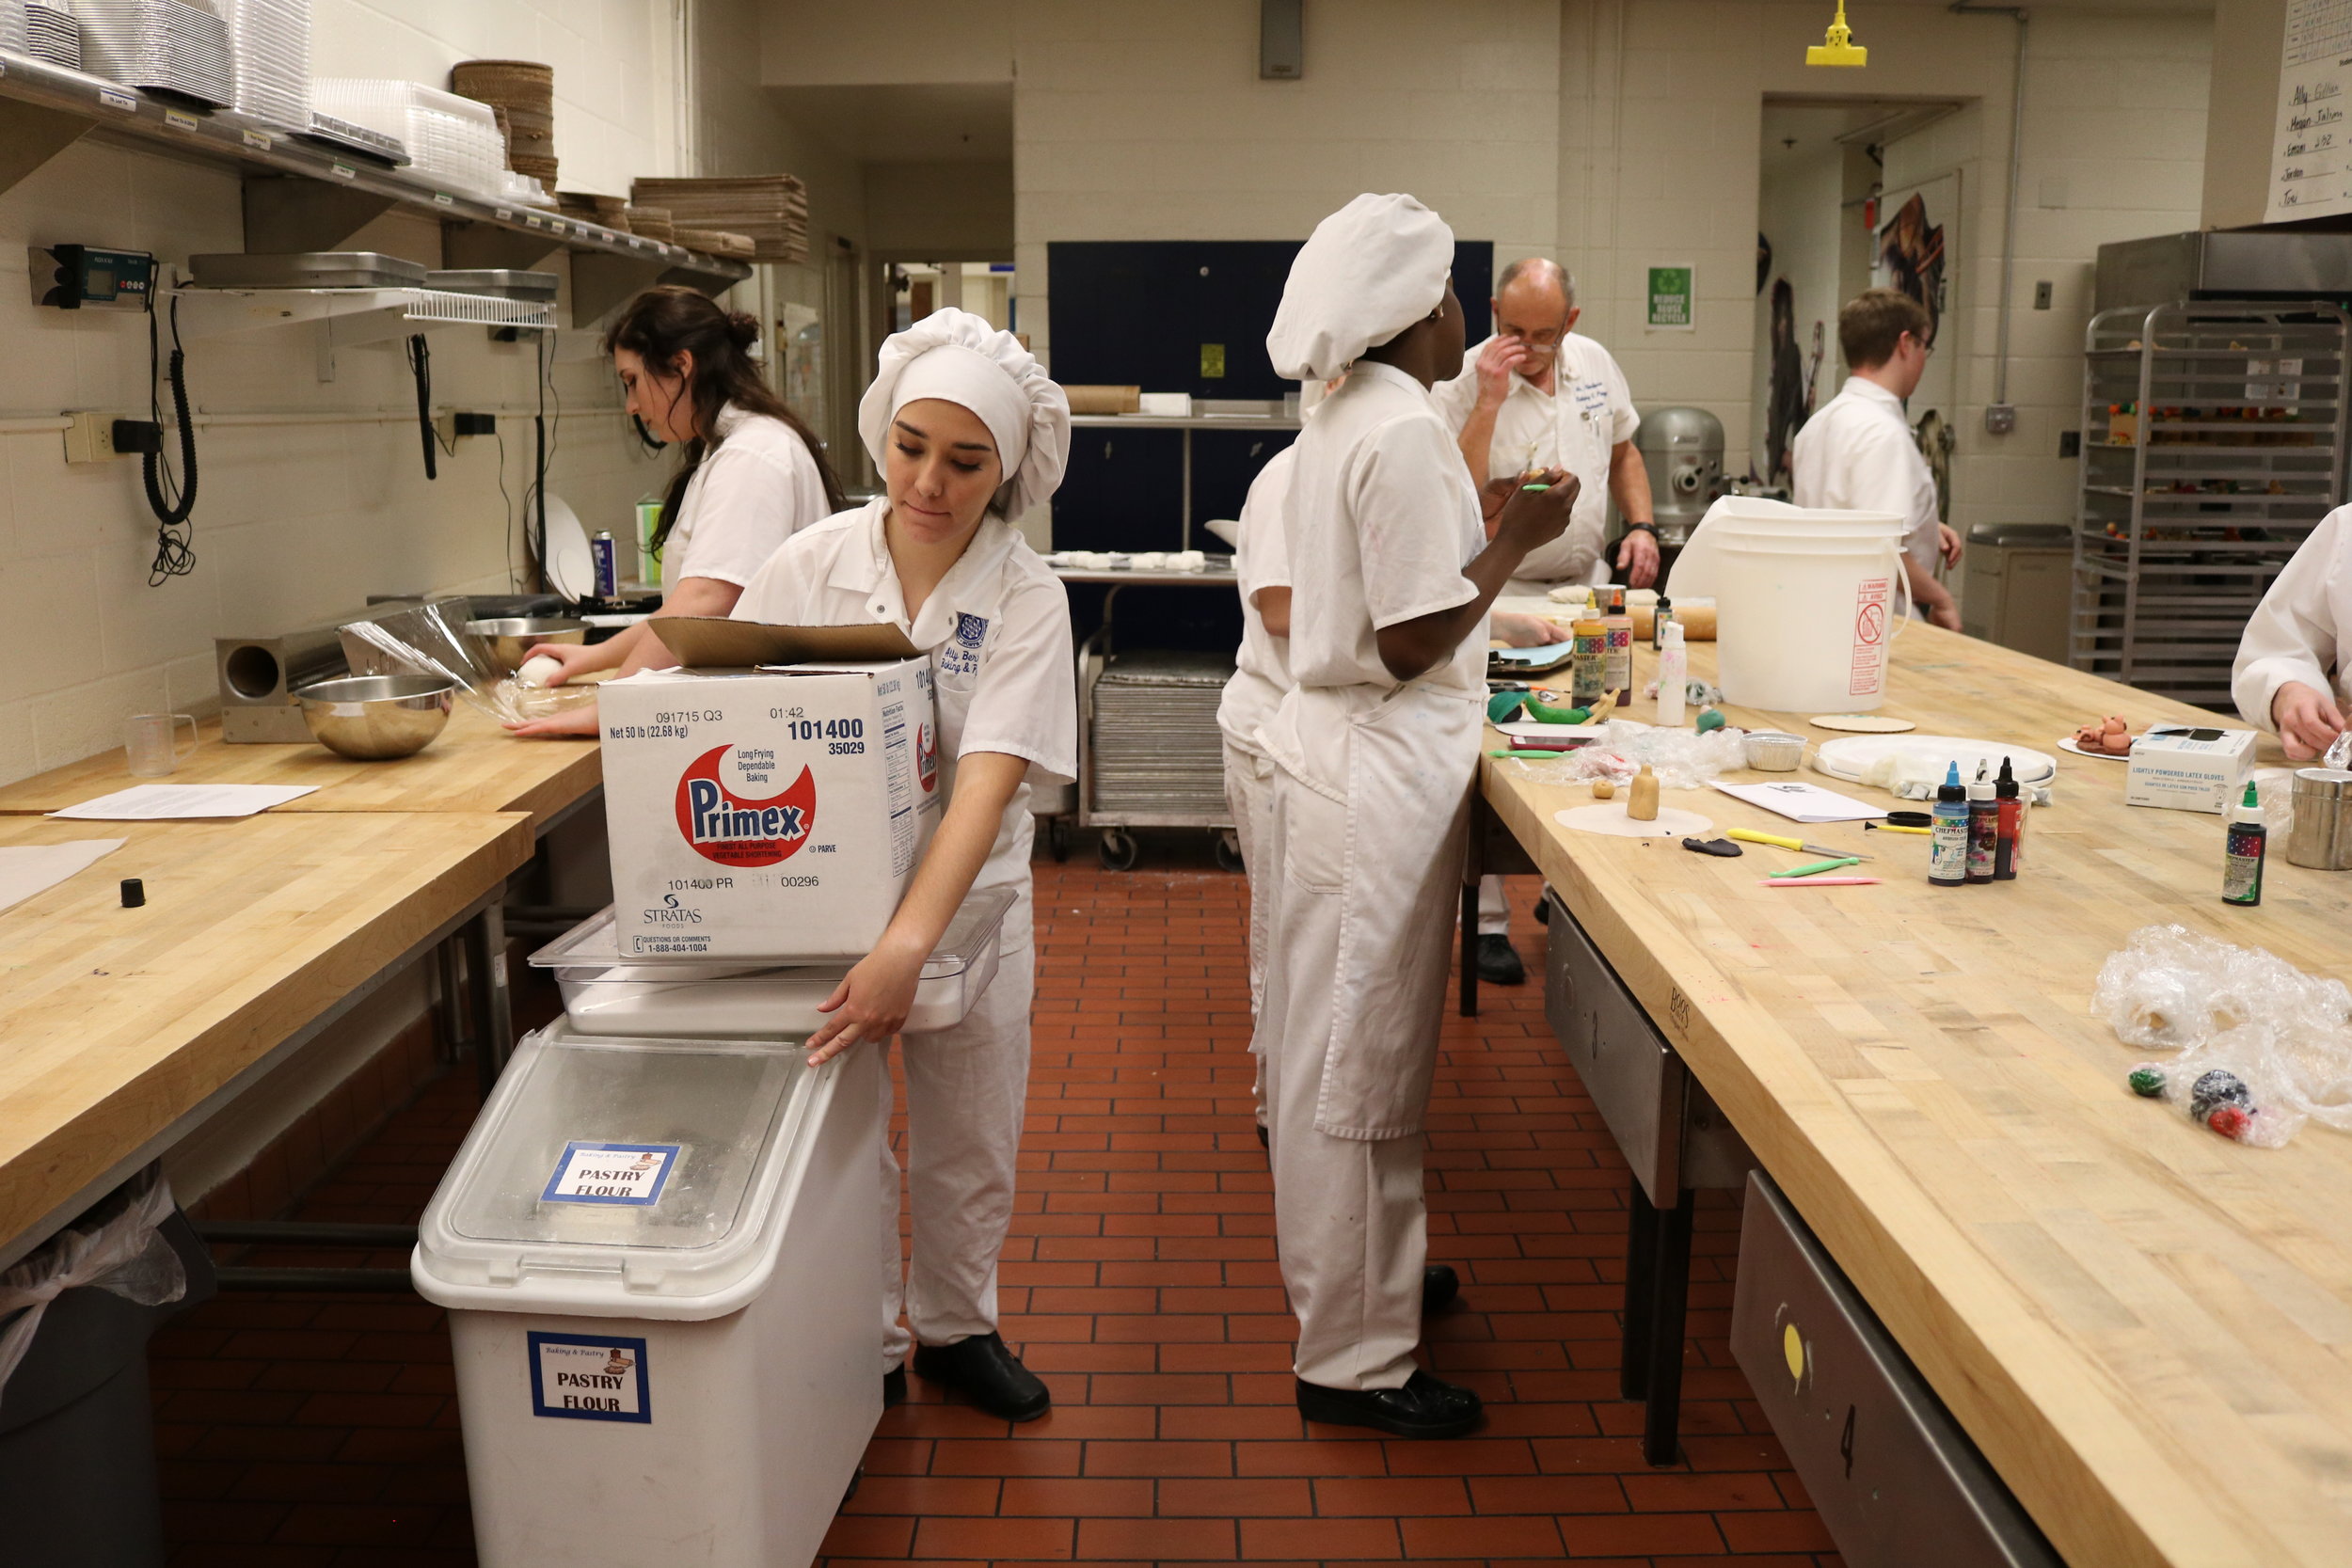   Ally Berrich, 17, gathers supplies to stay after her baking and pastry class at the Center of Applied Technology North in Severn, Md., on May 11, 2016.  